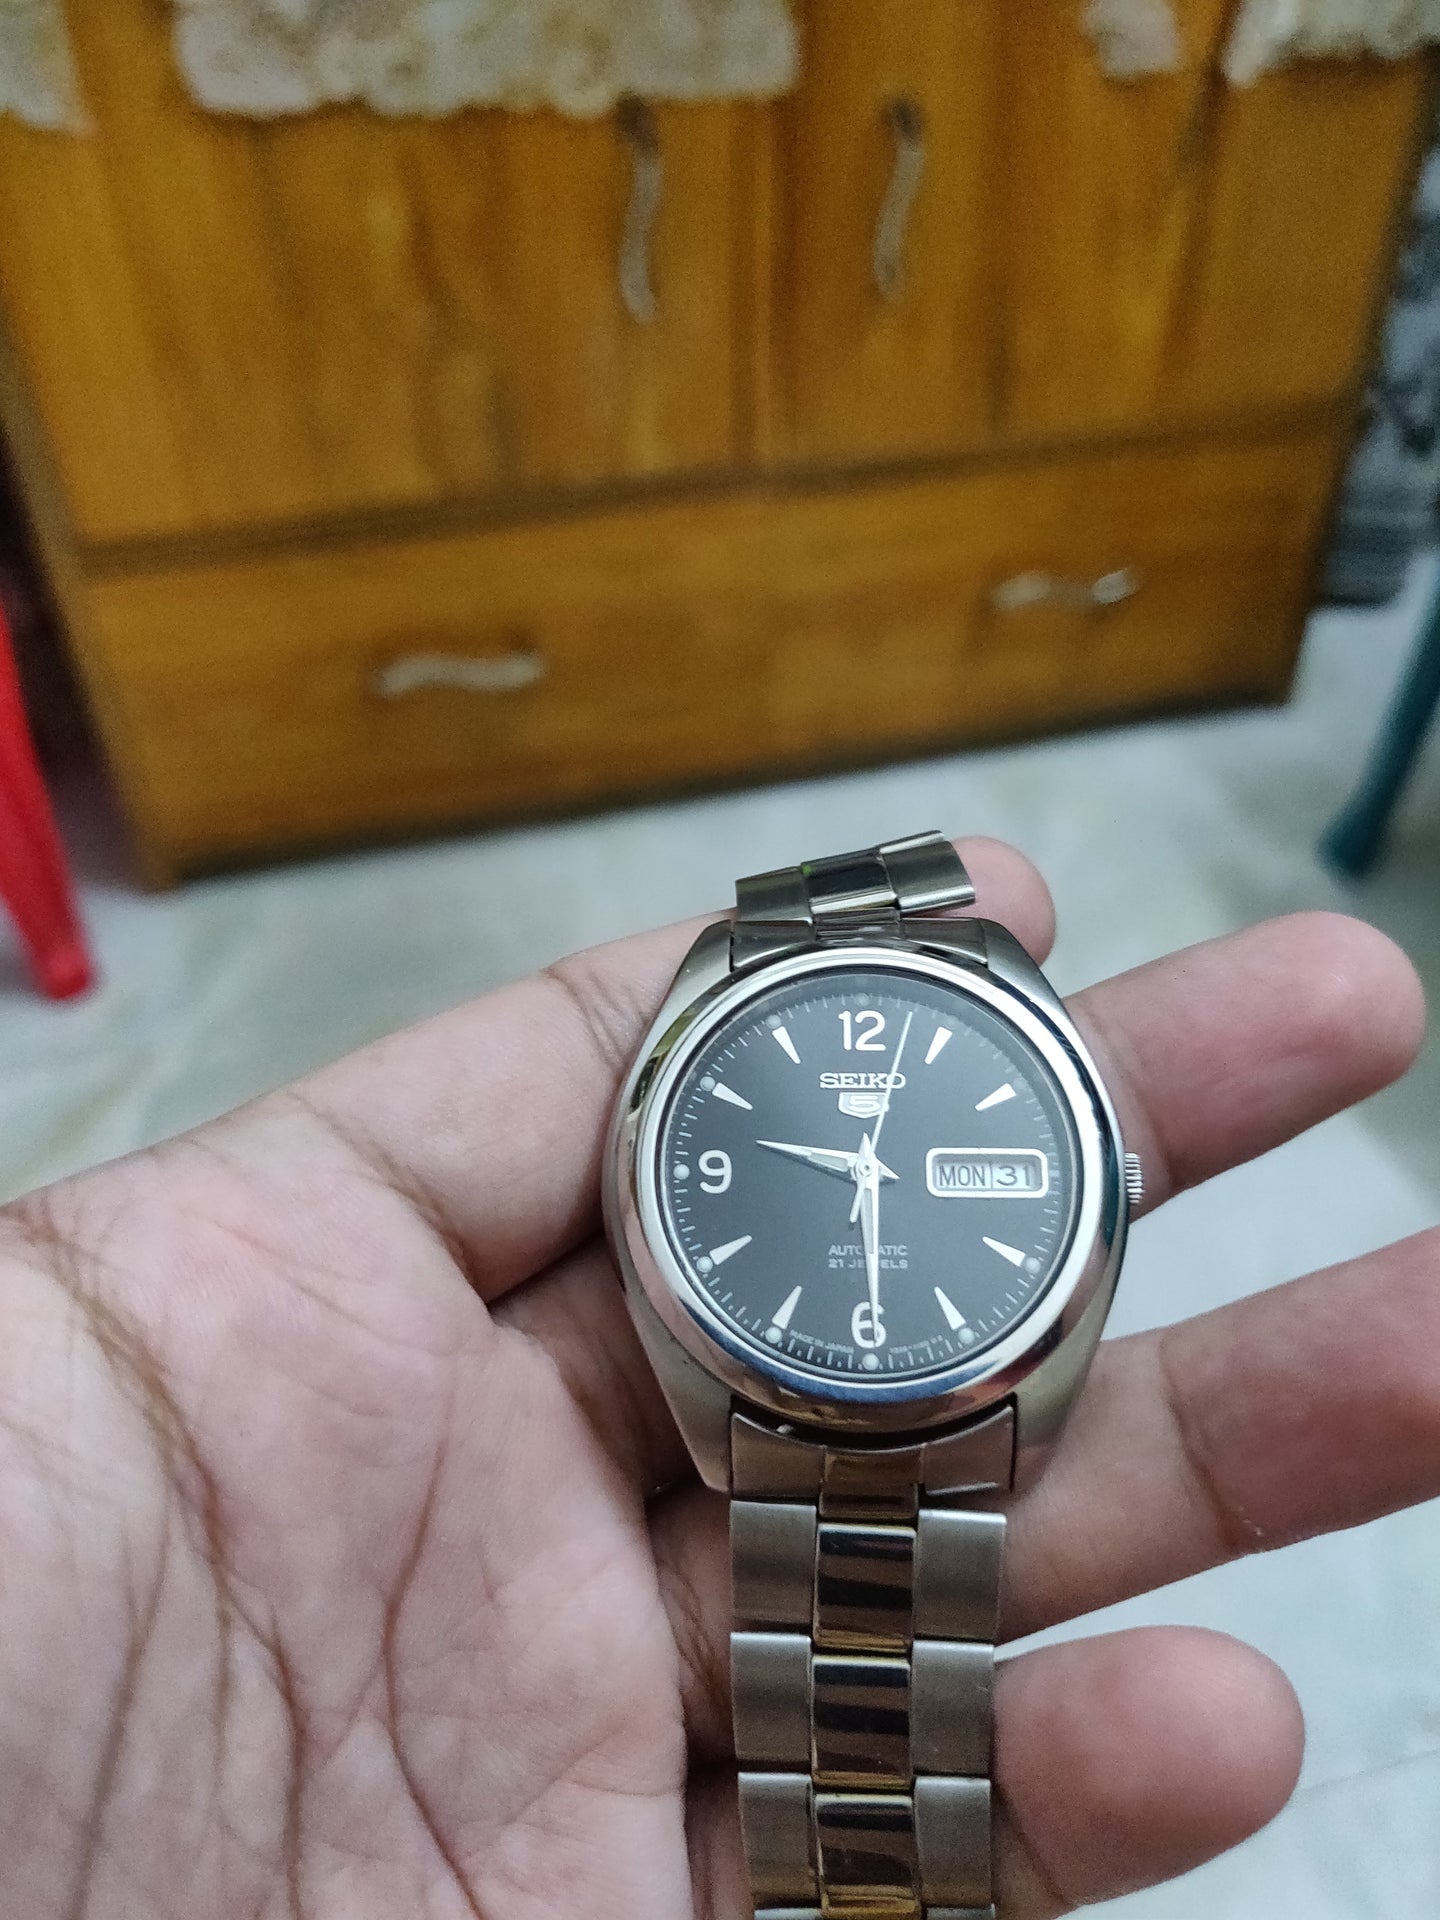 IS THIS SEIKO 5 Real or Fake? | WatchUSeek Watch Forums